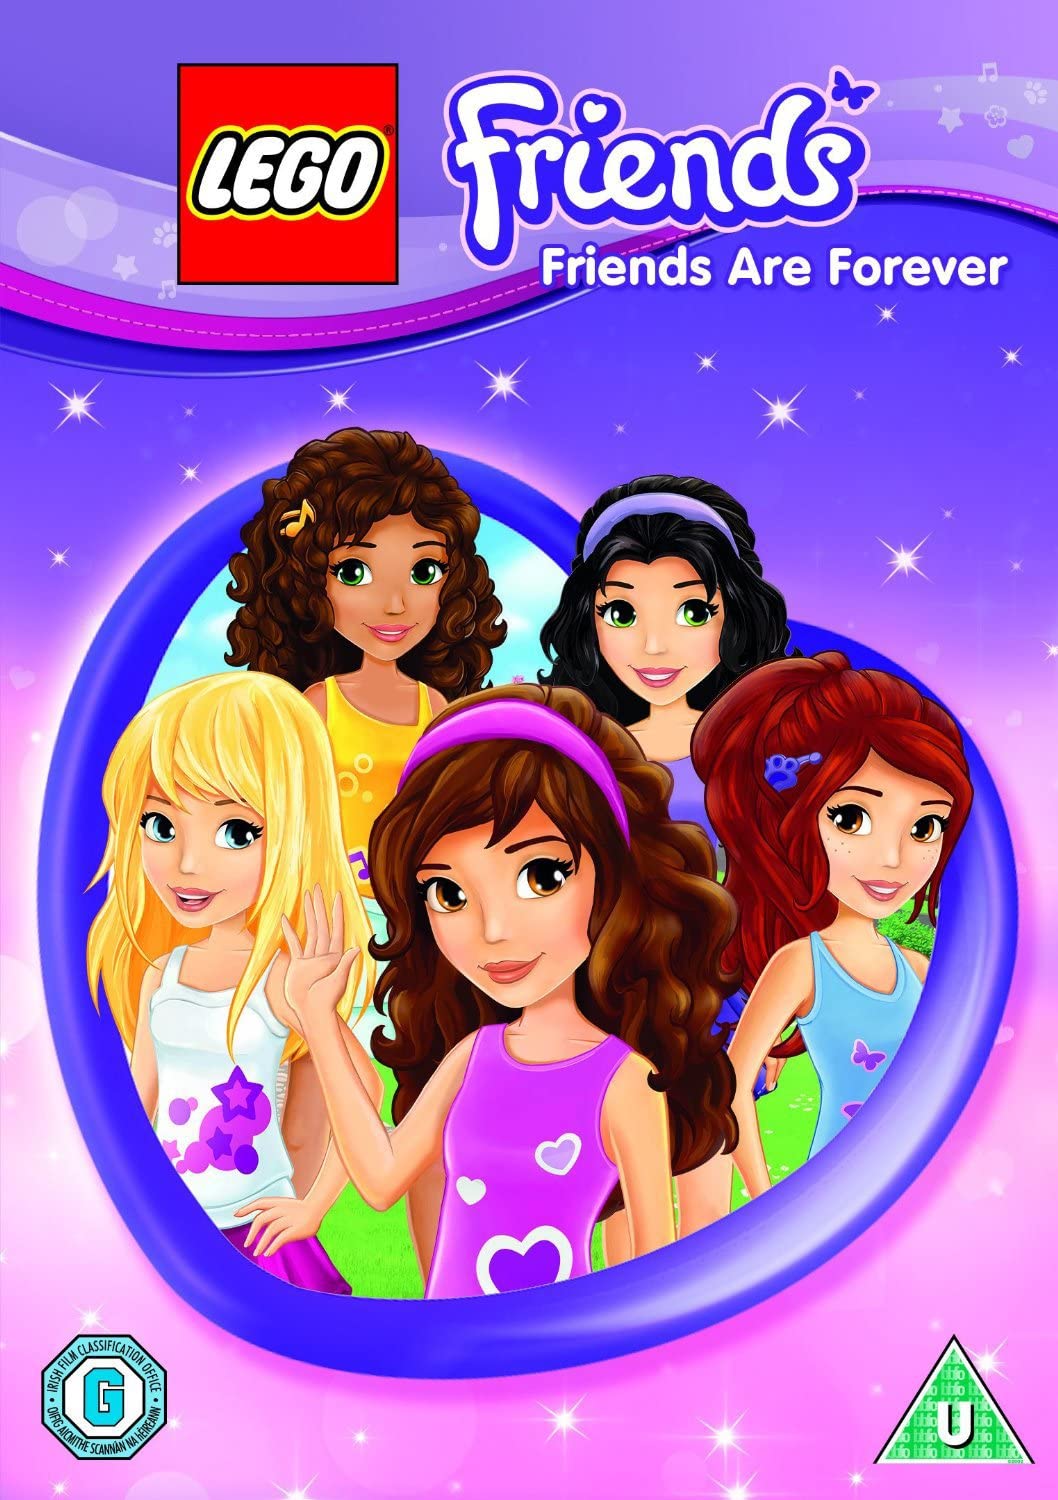 Lego Friends: Friends Are Forever (includes Colouring Sheet) [DVD]